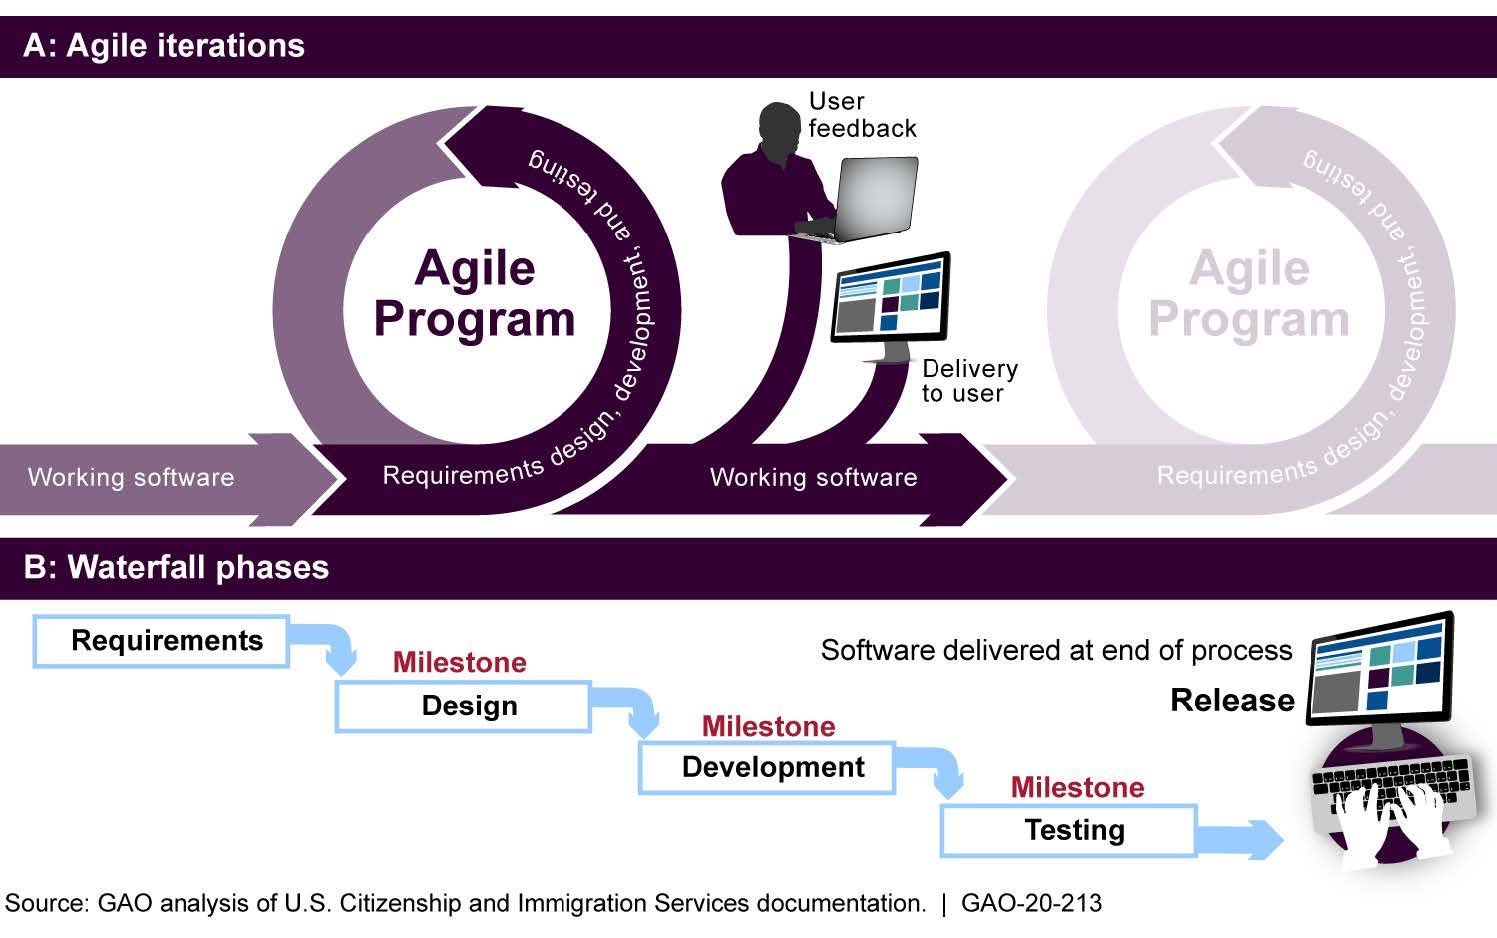 Comparison of Agile and Waterfall Methods for Developing Software